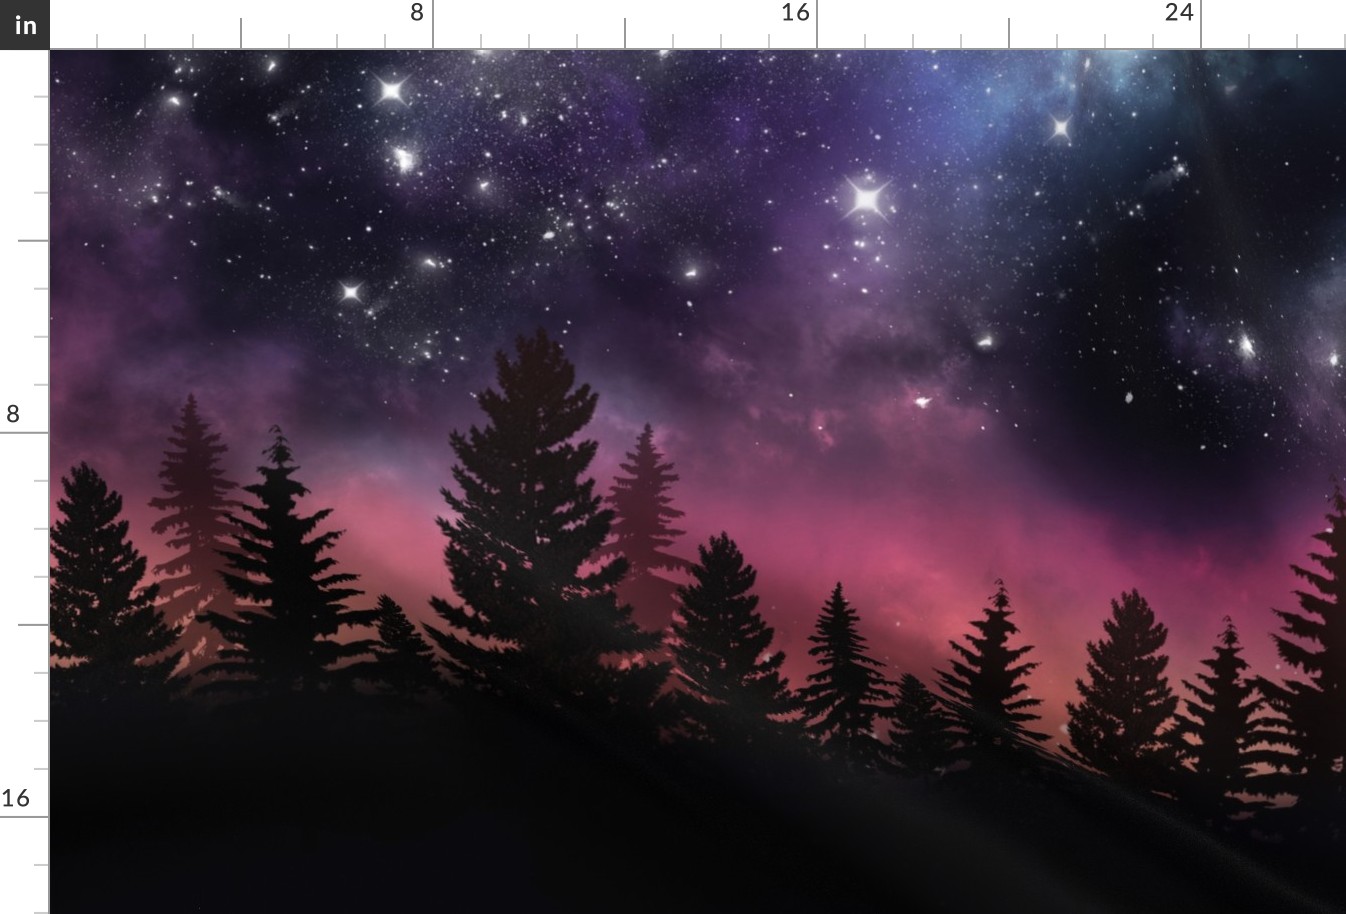 night sky over the pine forest